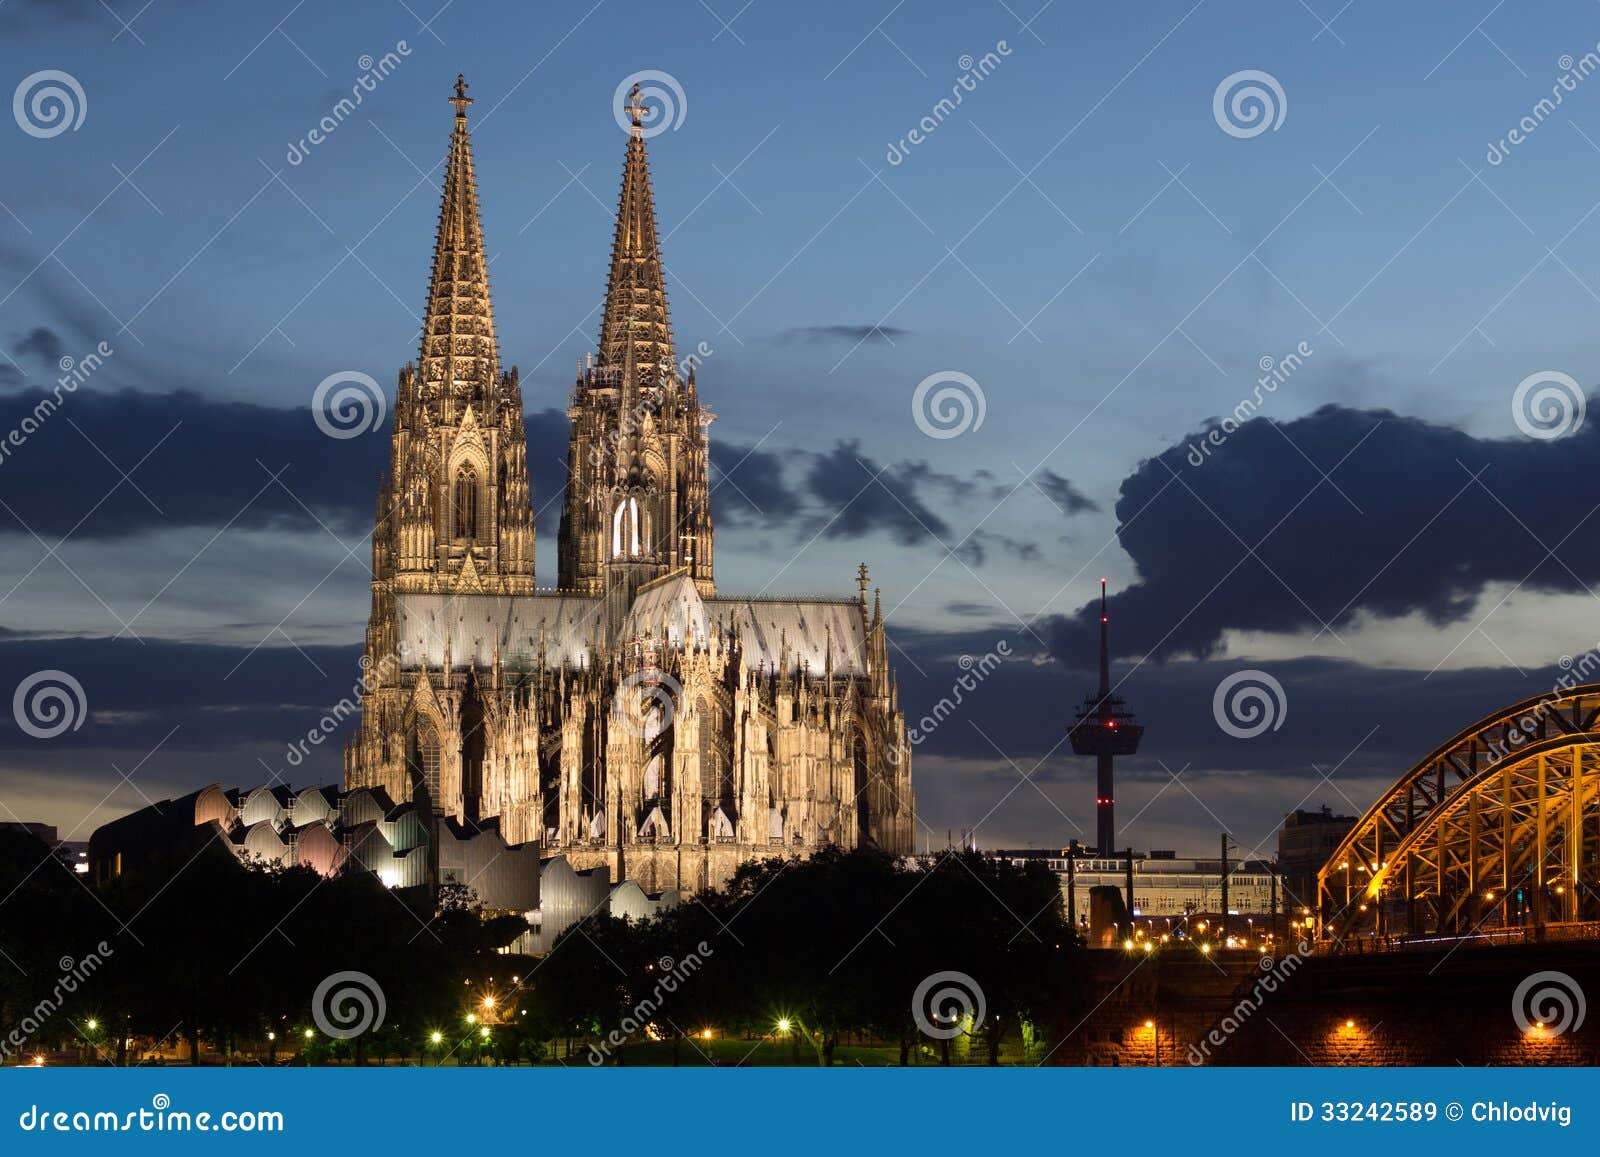 cathedral after sunset at night in cologne, germany